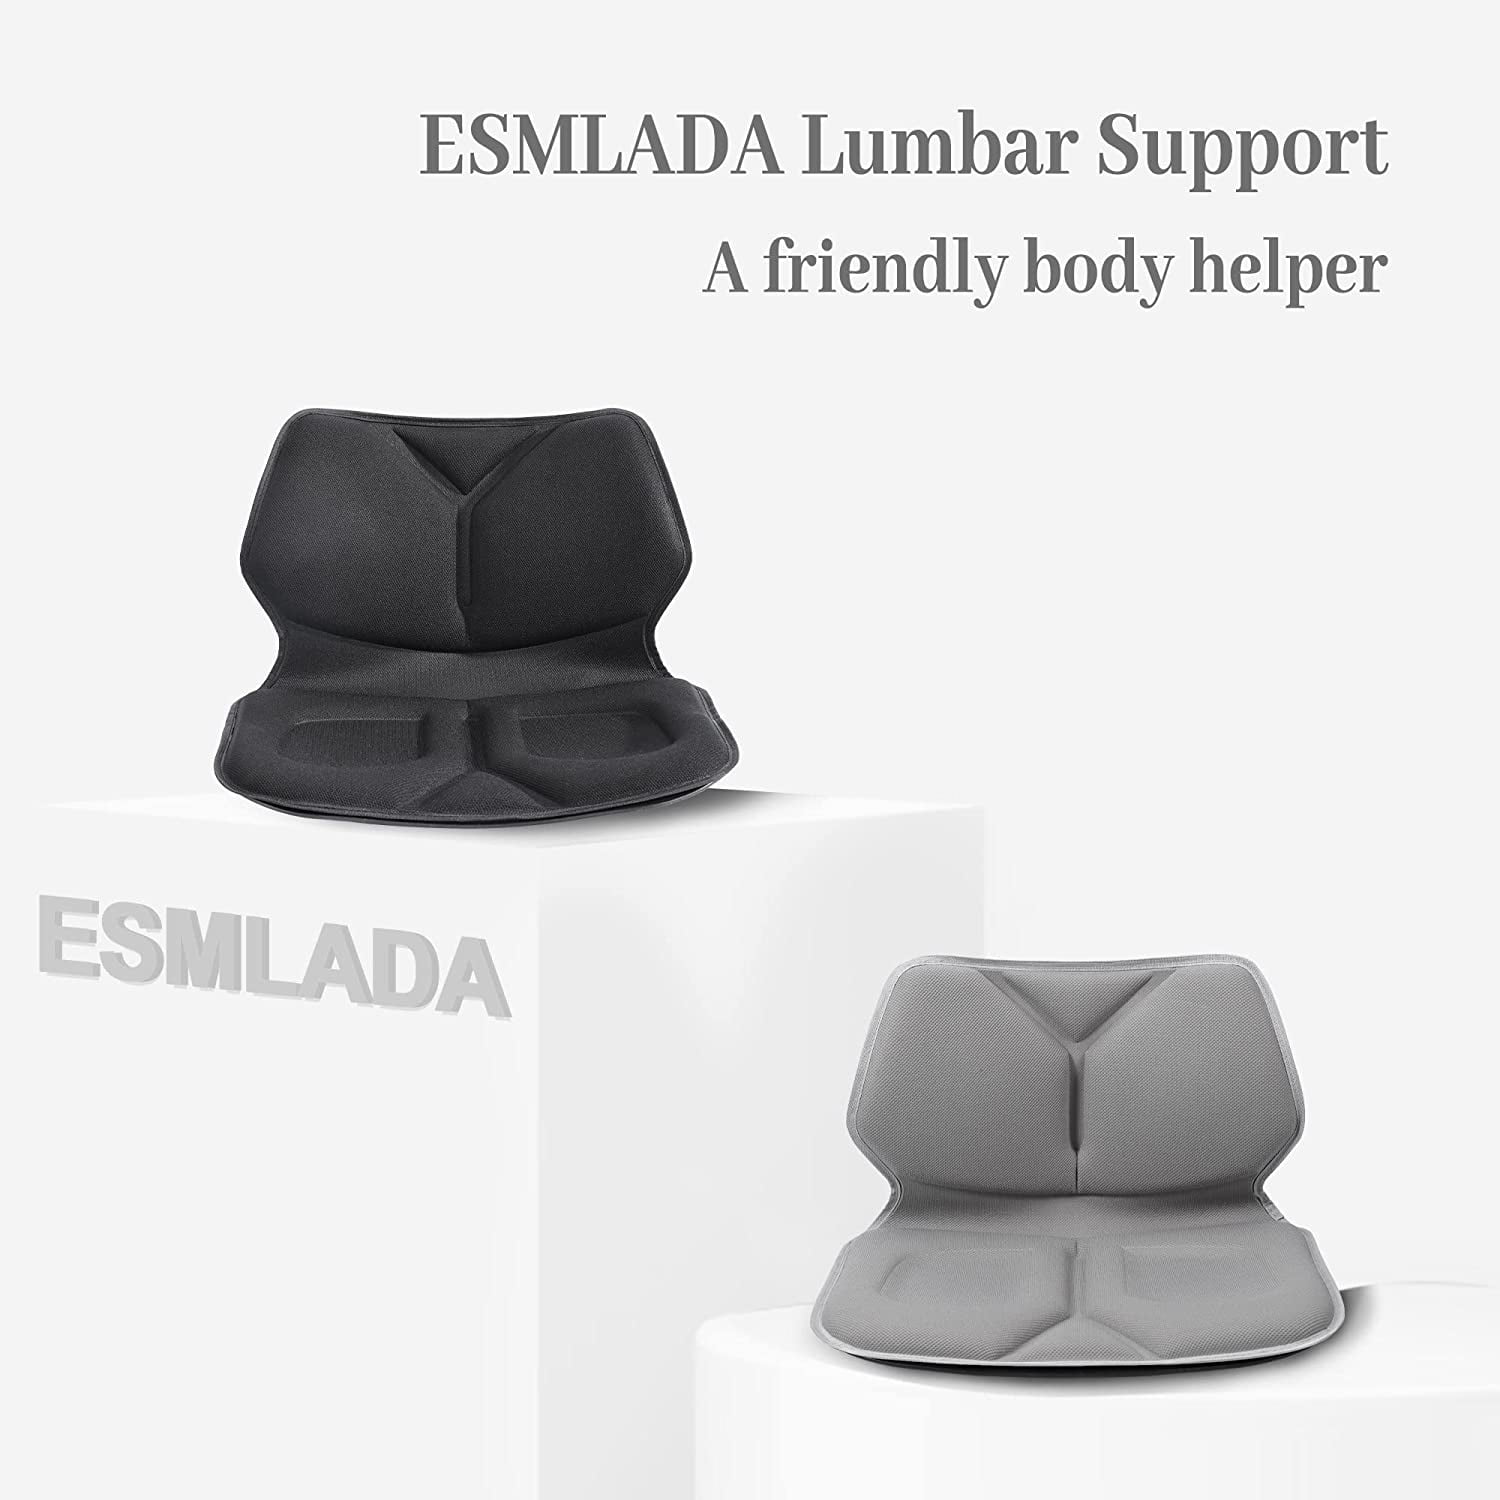 Esmlada Chair Extra Wide Seat Cushion, Lumbar Support, Adjustable Back  Brace Posture Correction & Back Support for Lumbar pain 